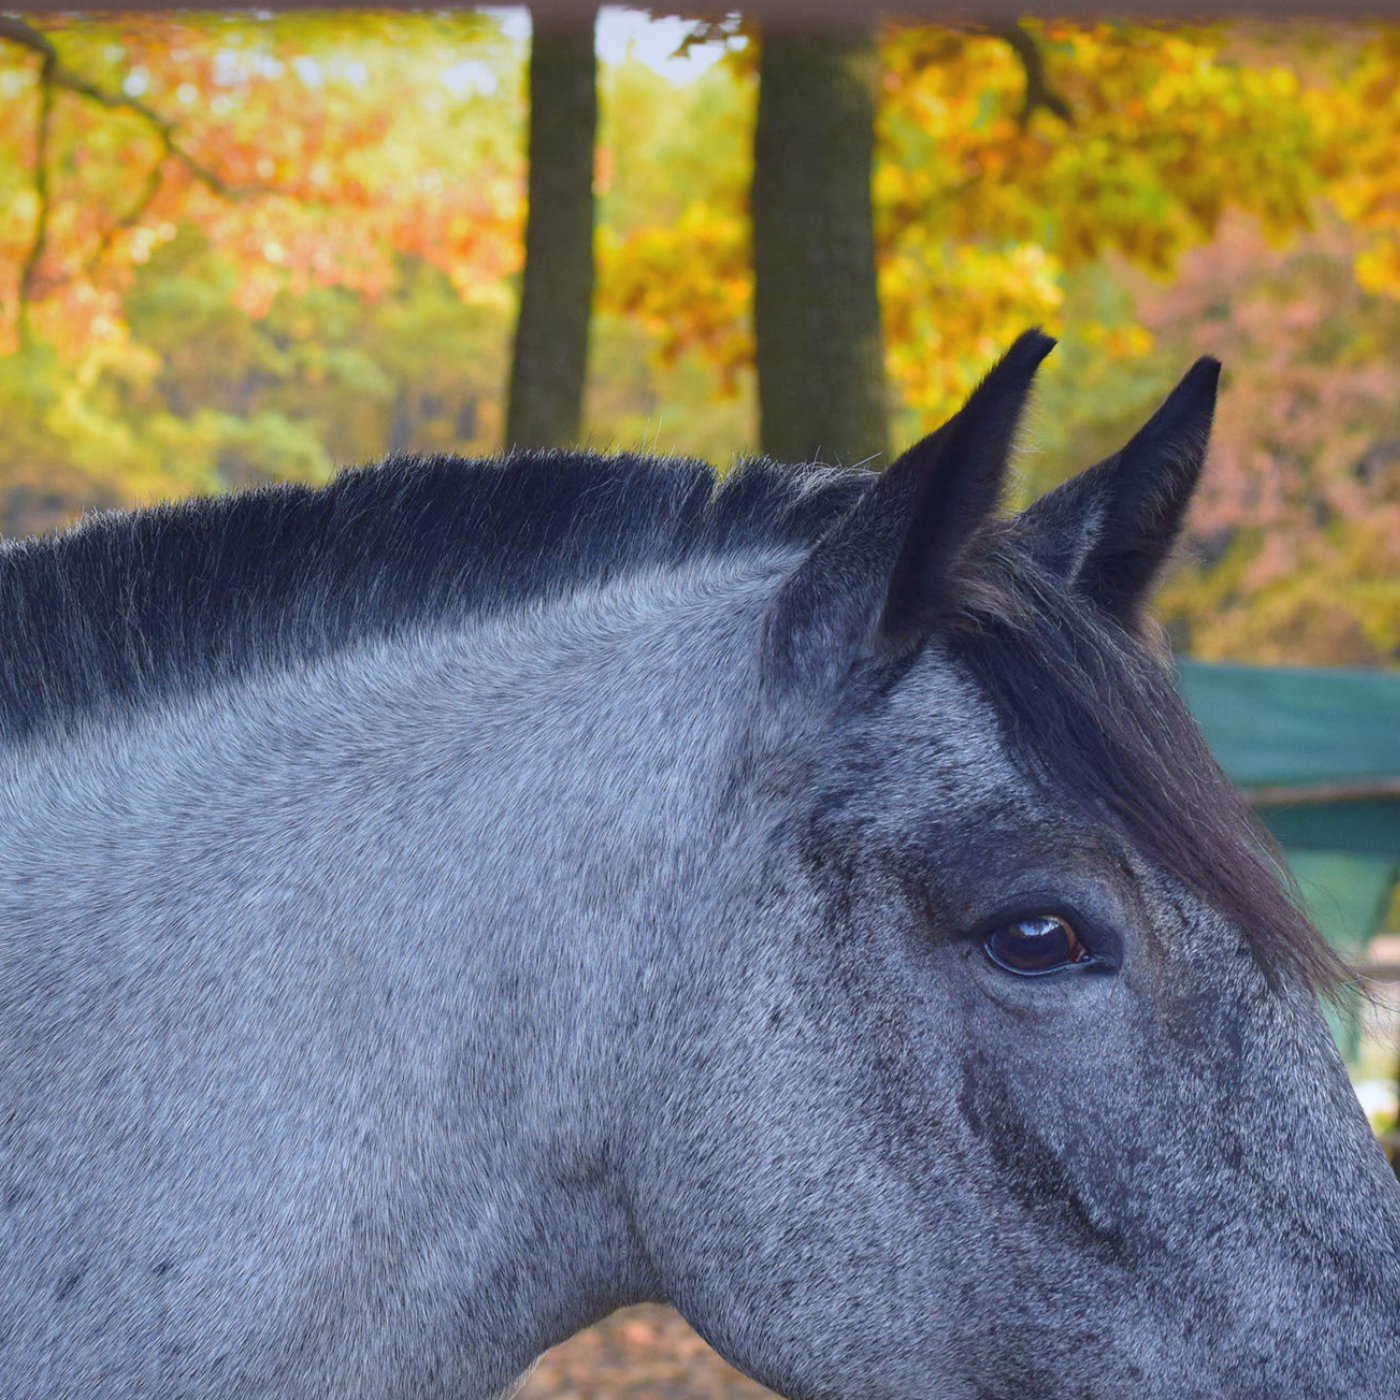 A grey roan horse with a short spikey roached mane.